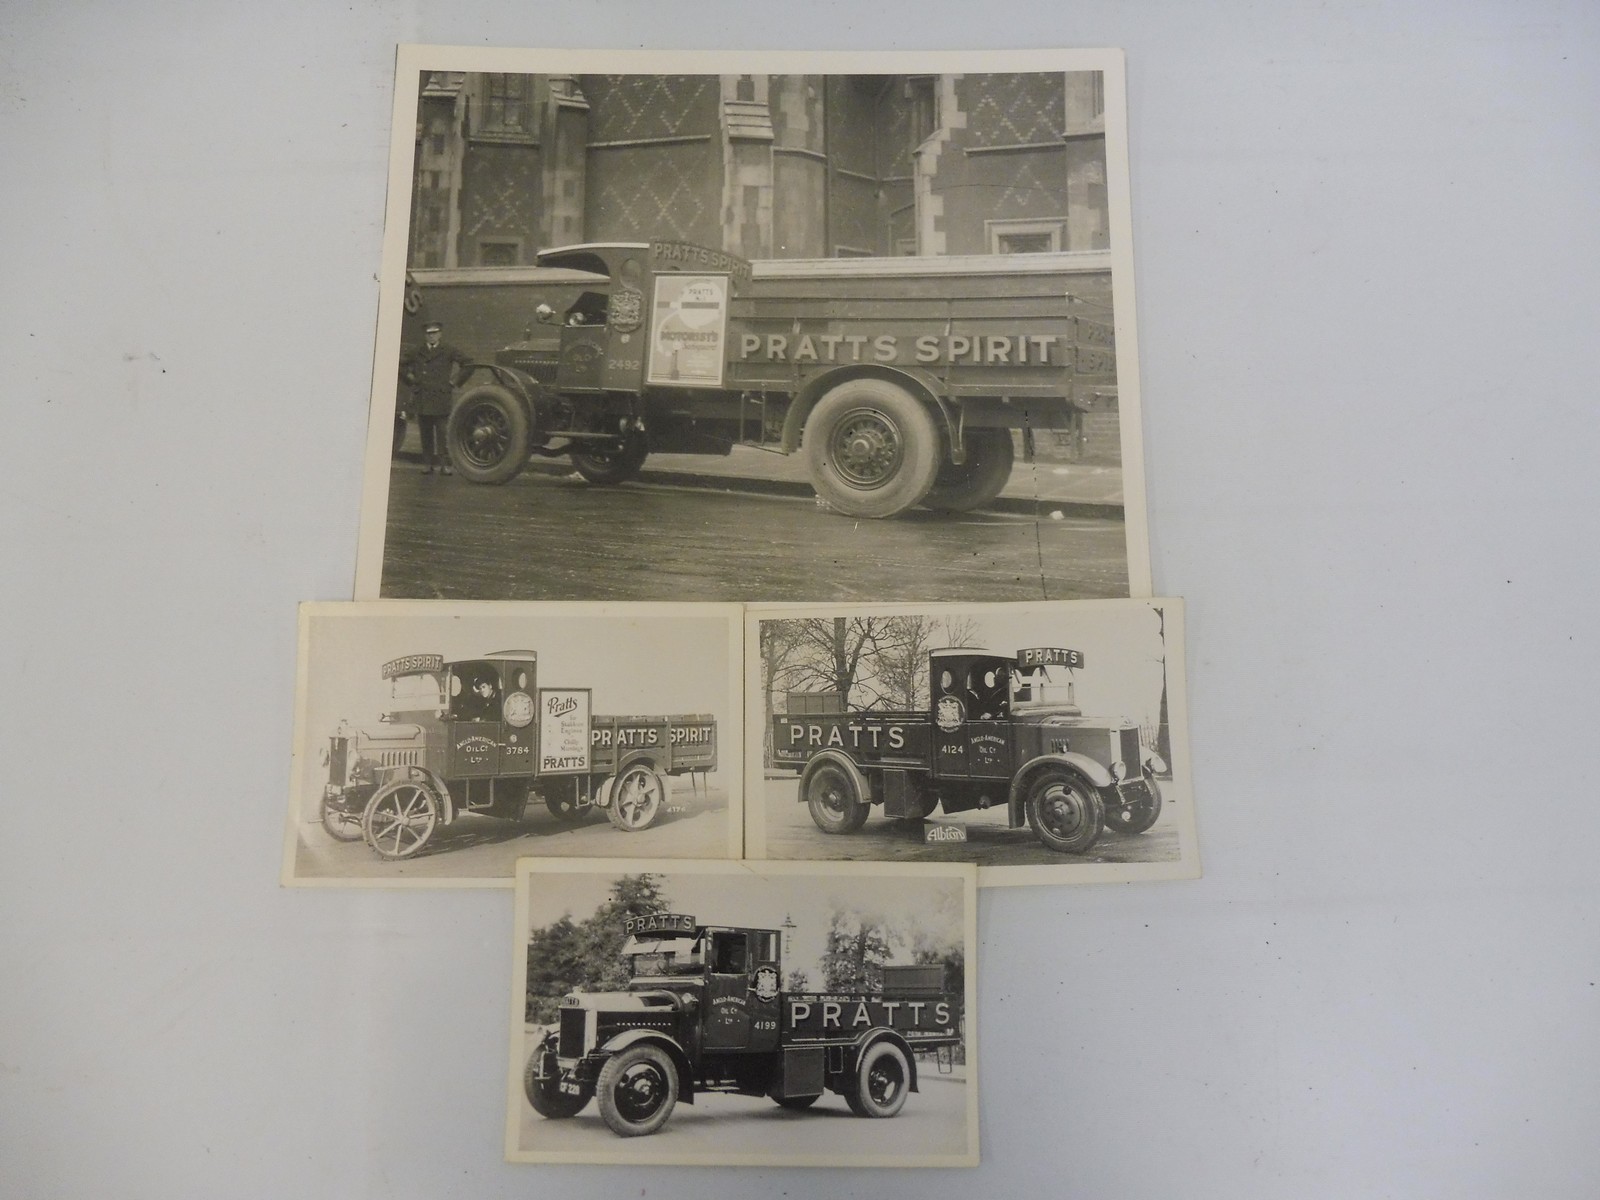 Four black and white photographs depicting early fuel tankers, all in Pratts livery.